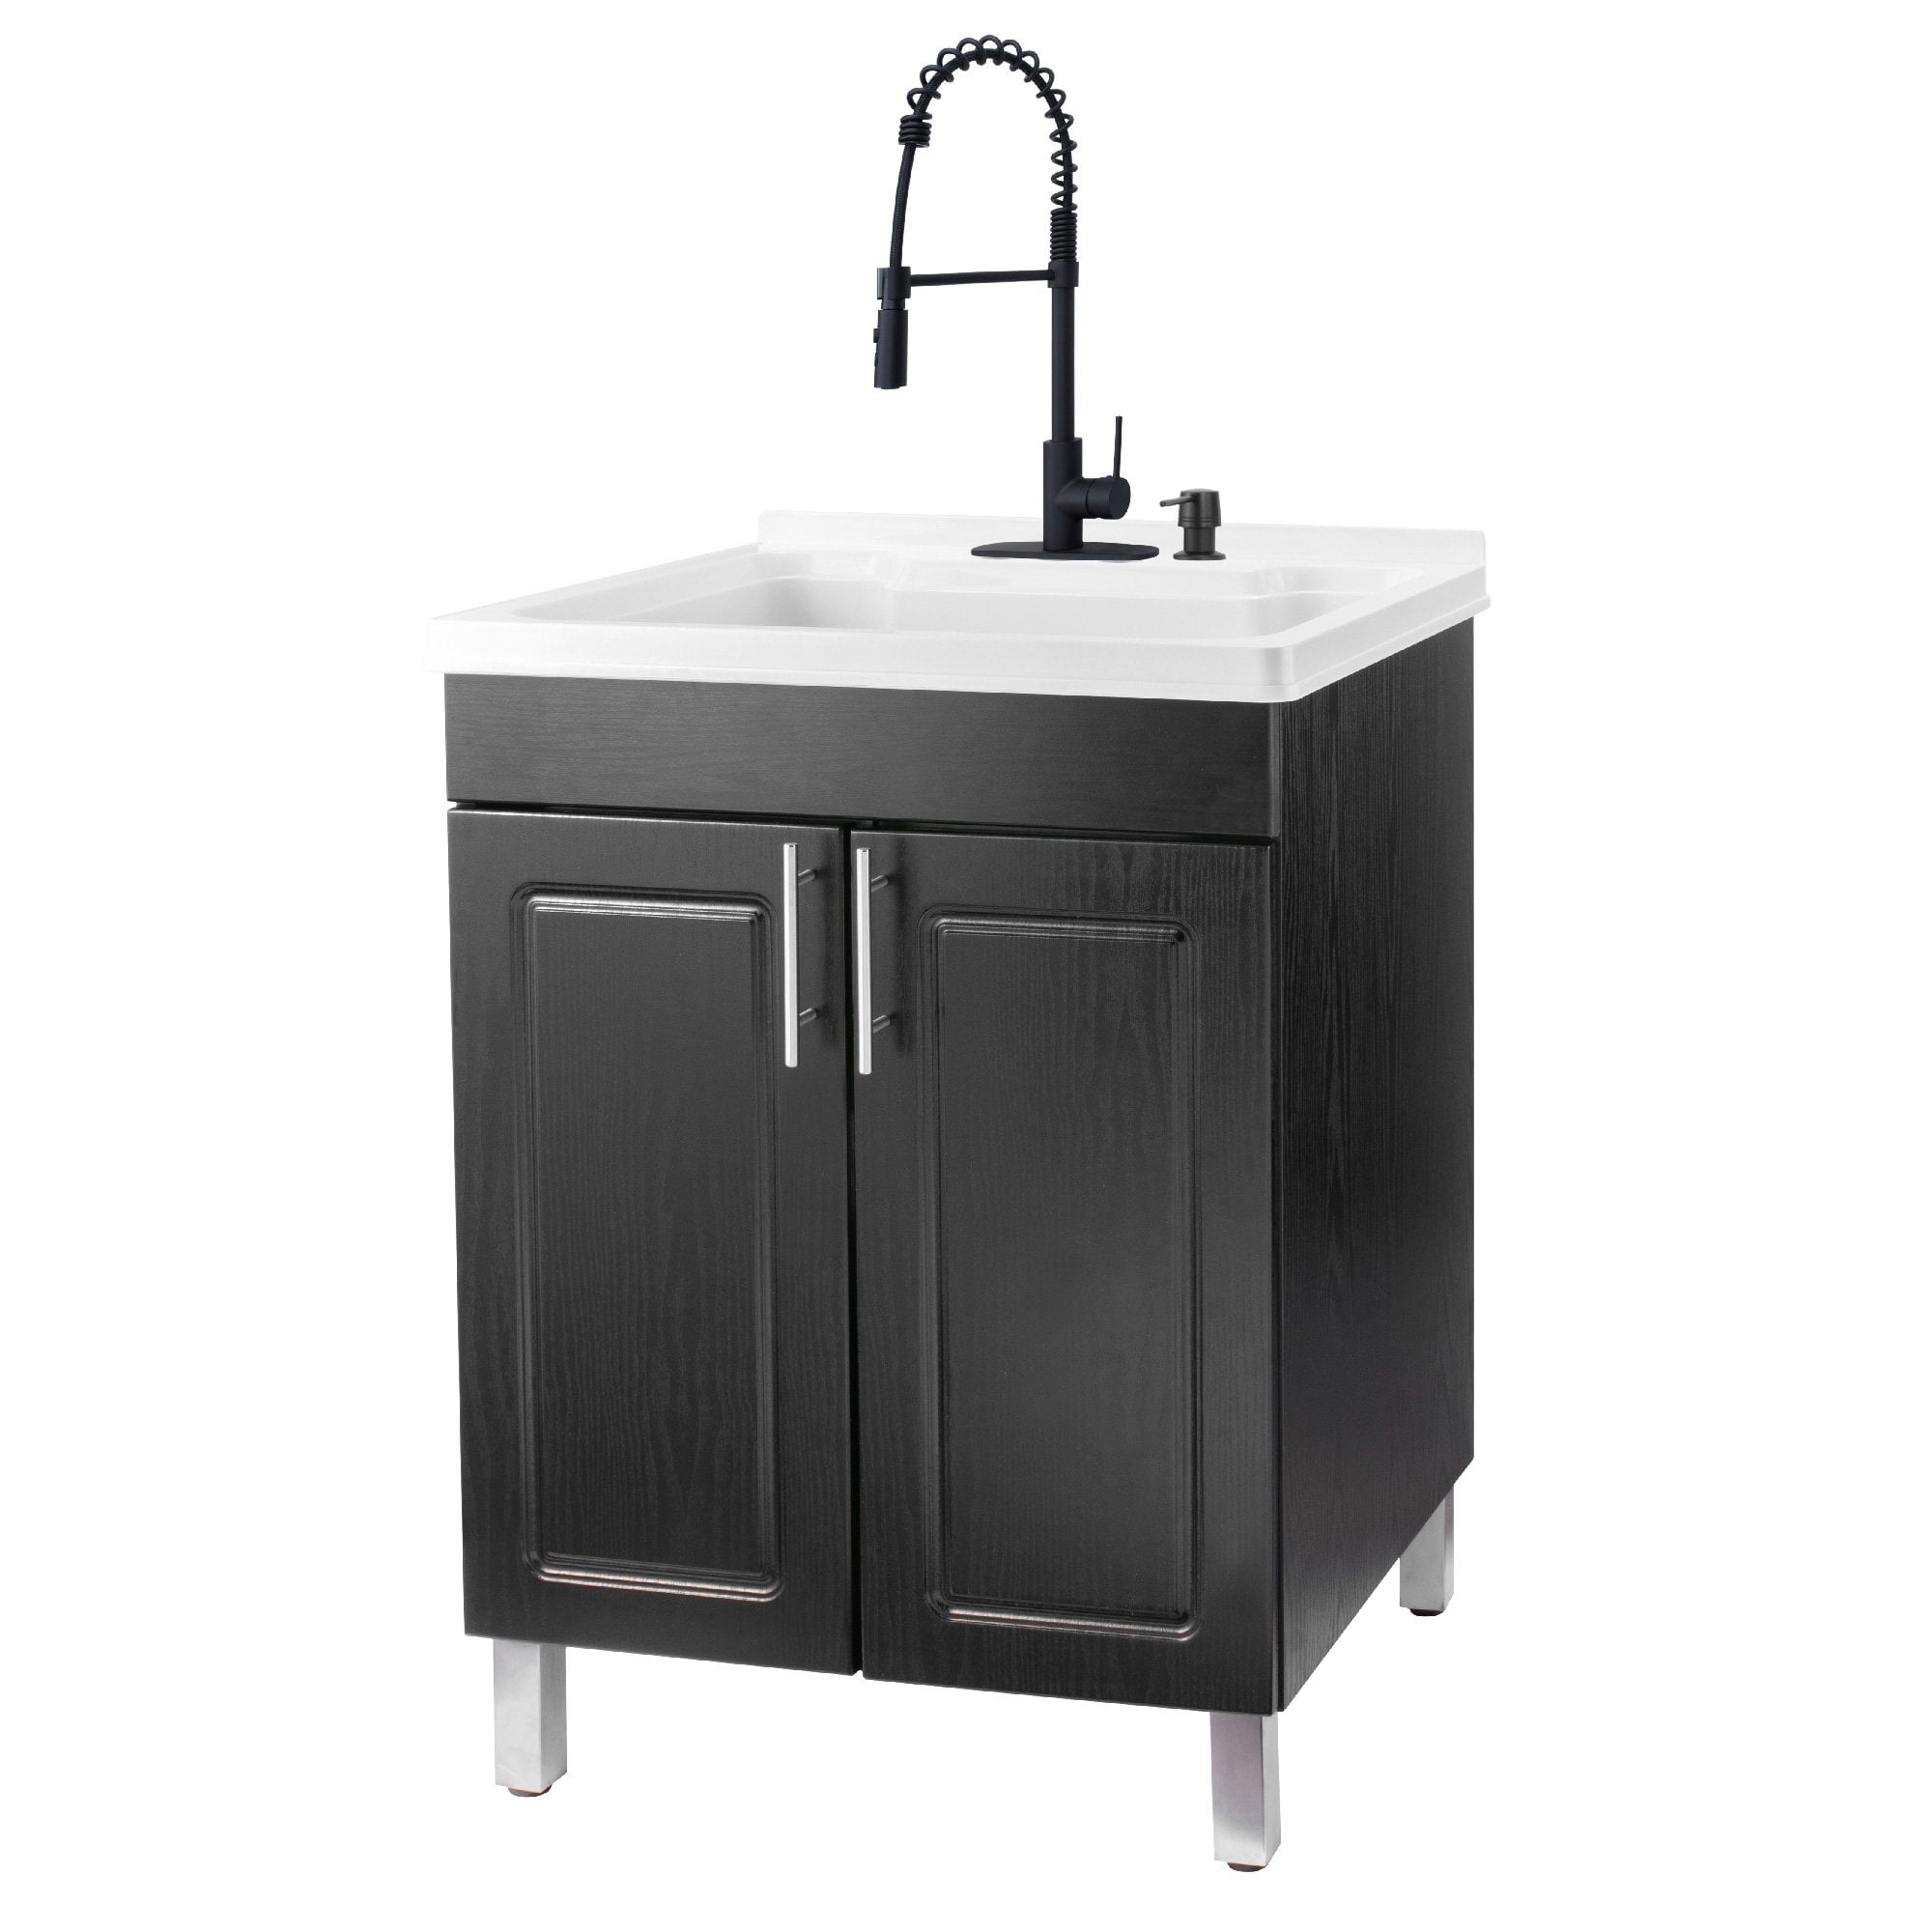 Tehila Black Utility Sink Laundry, Utility Sink And Cabinet For Laundry Room